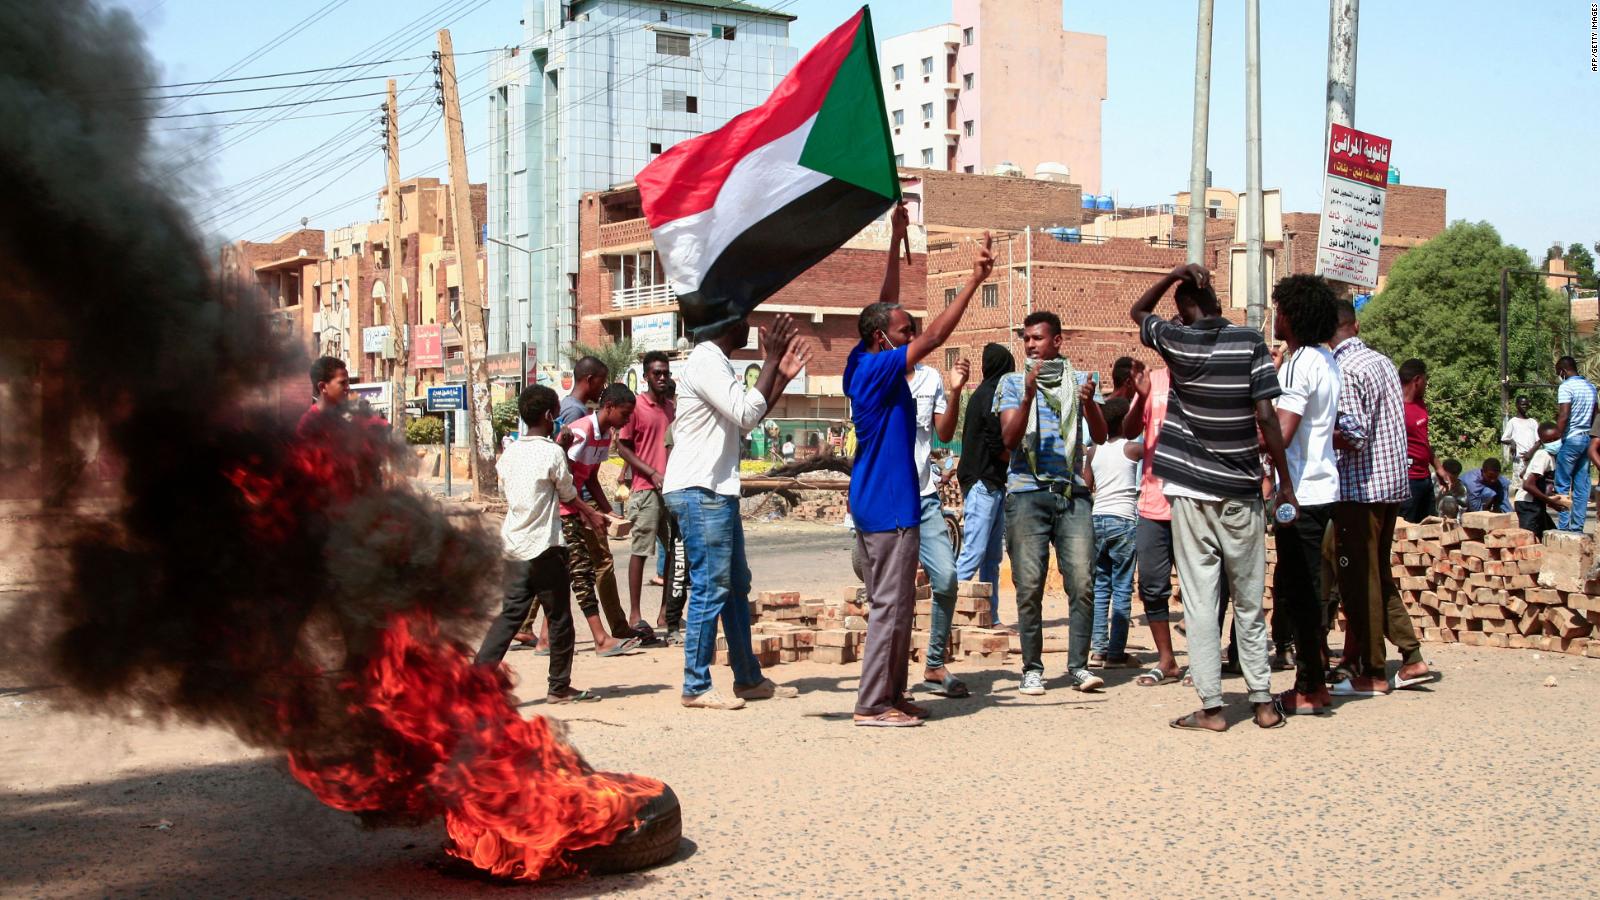 Sudan Coup Explained The Military Has Taken Over In Sudan Heres What